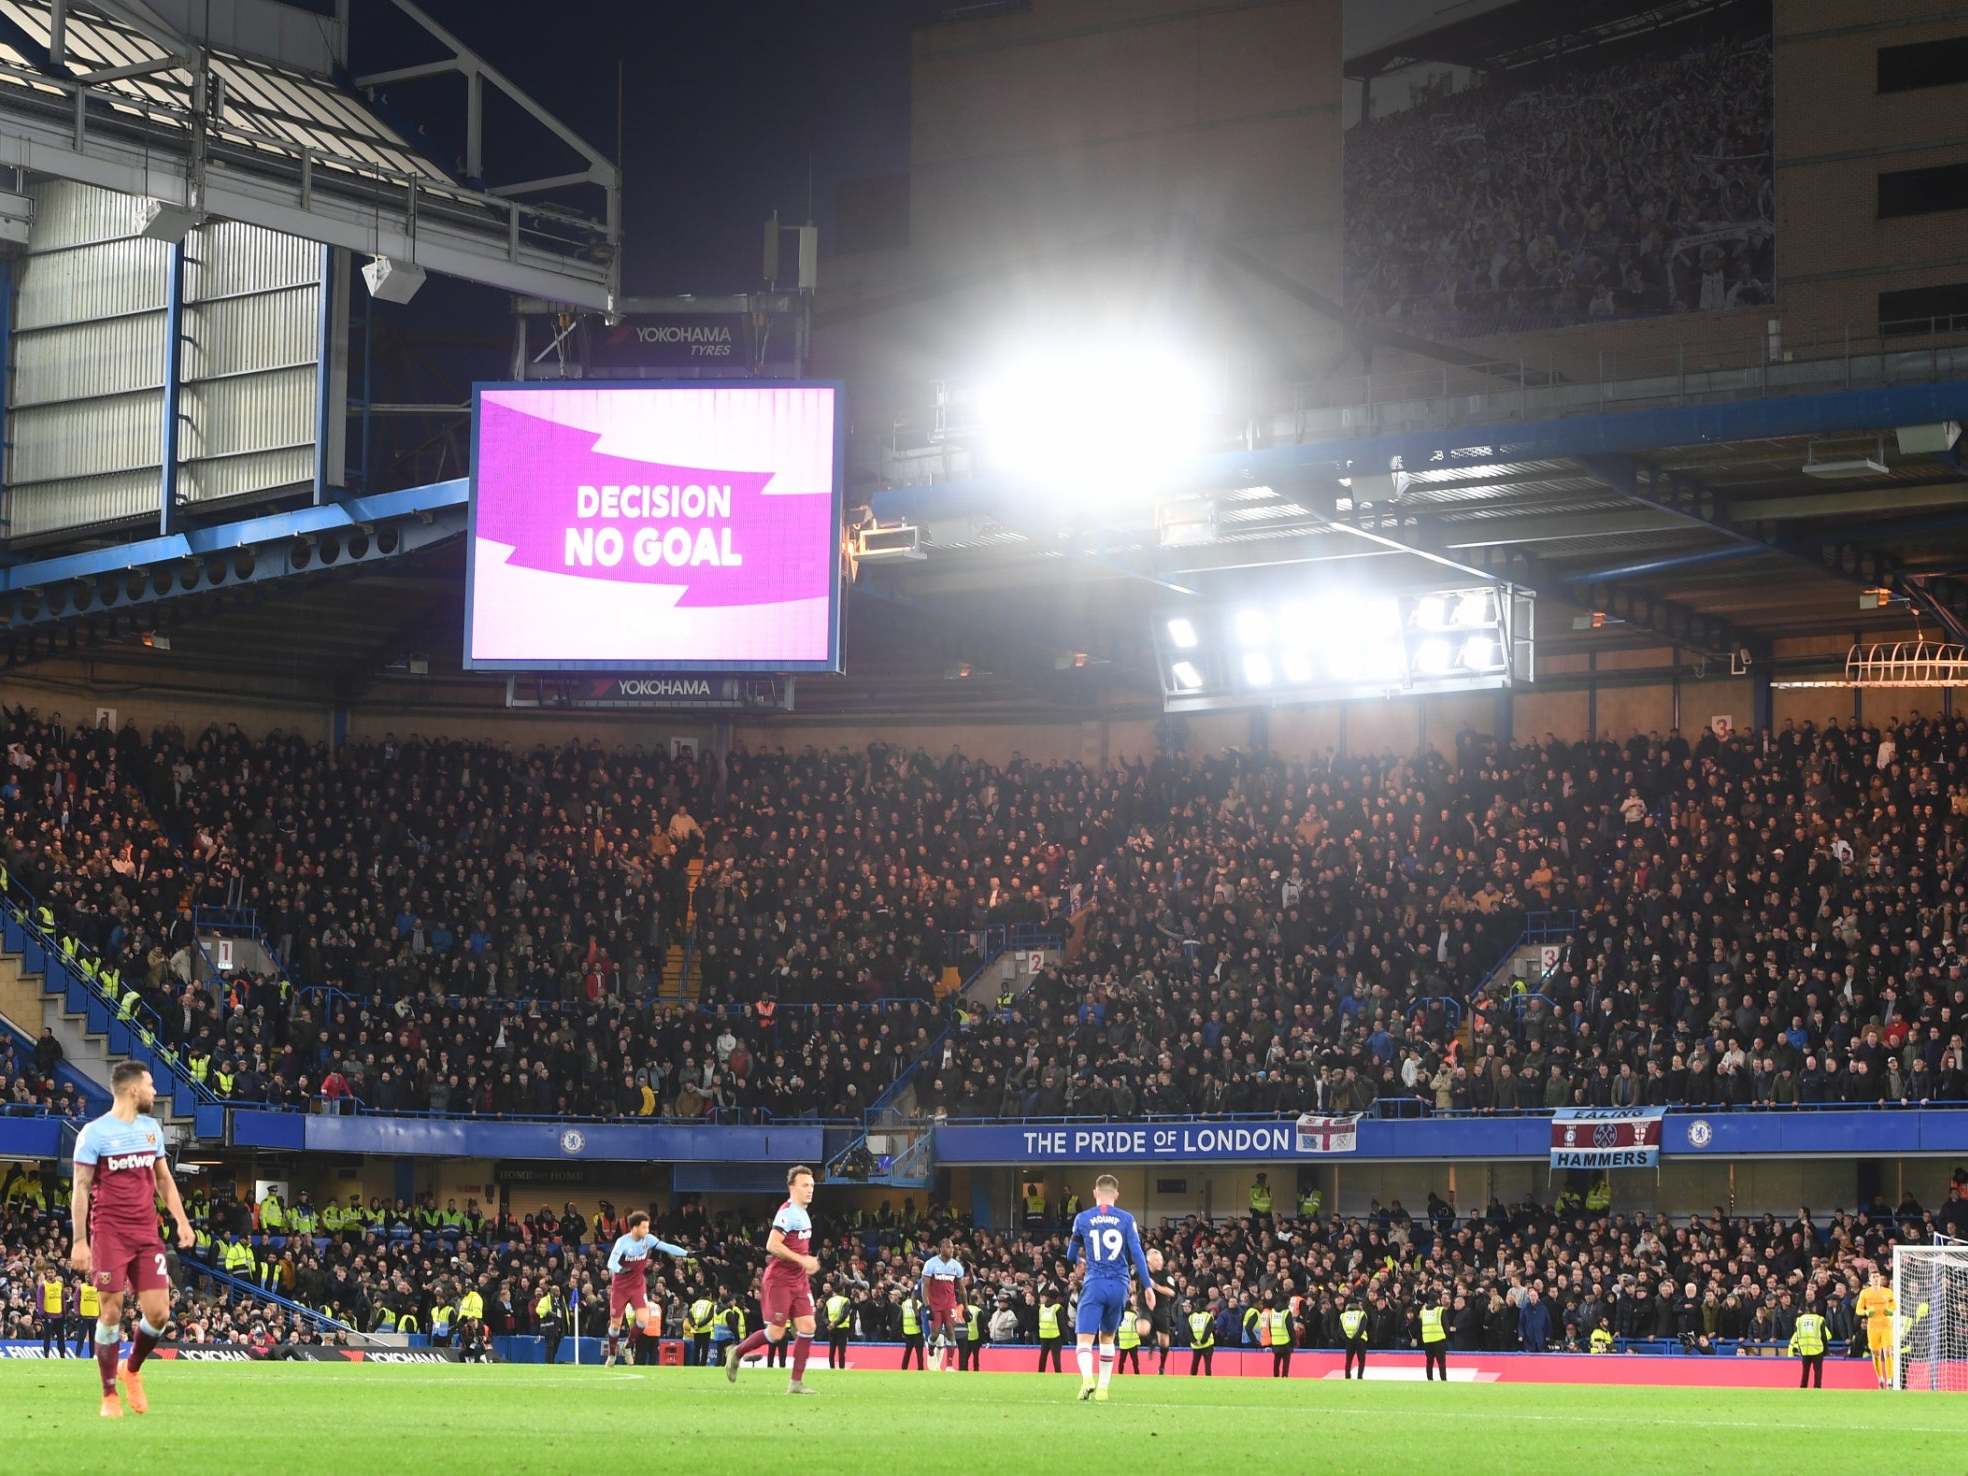 West Ham fans have been accused of singing homophobic chants at Chelsea